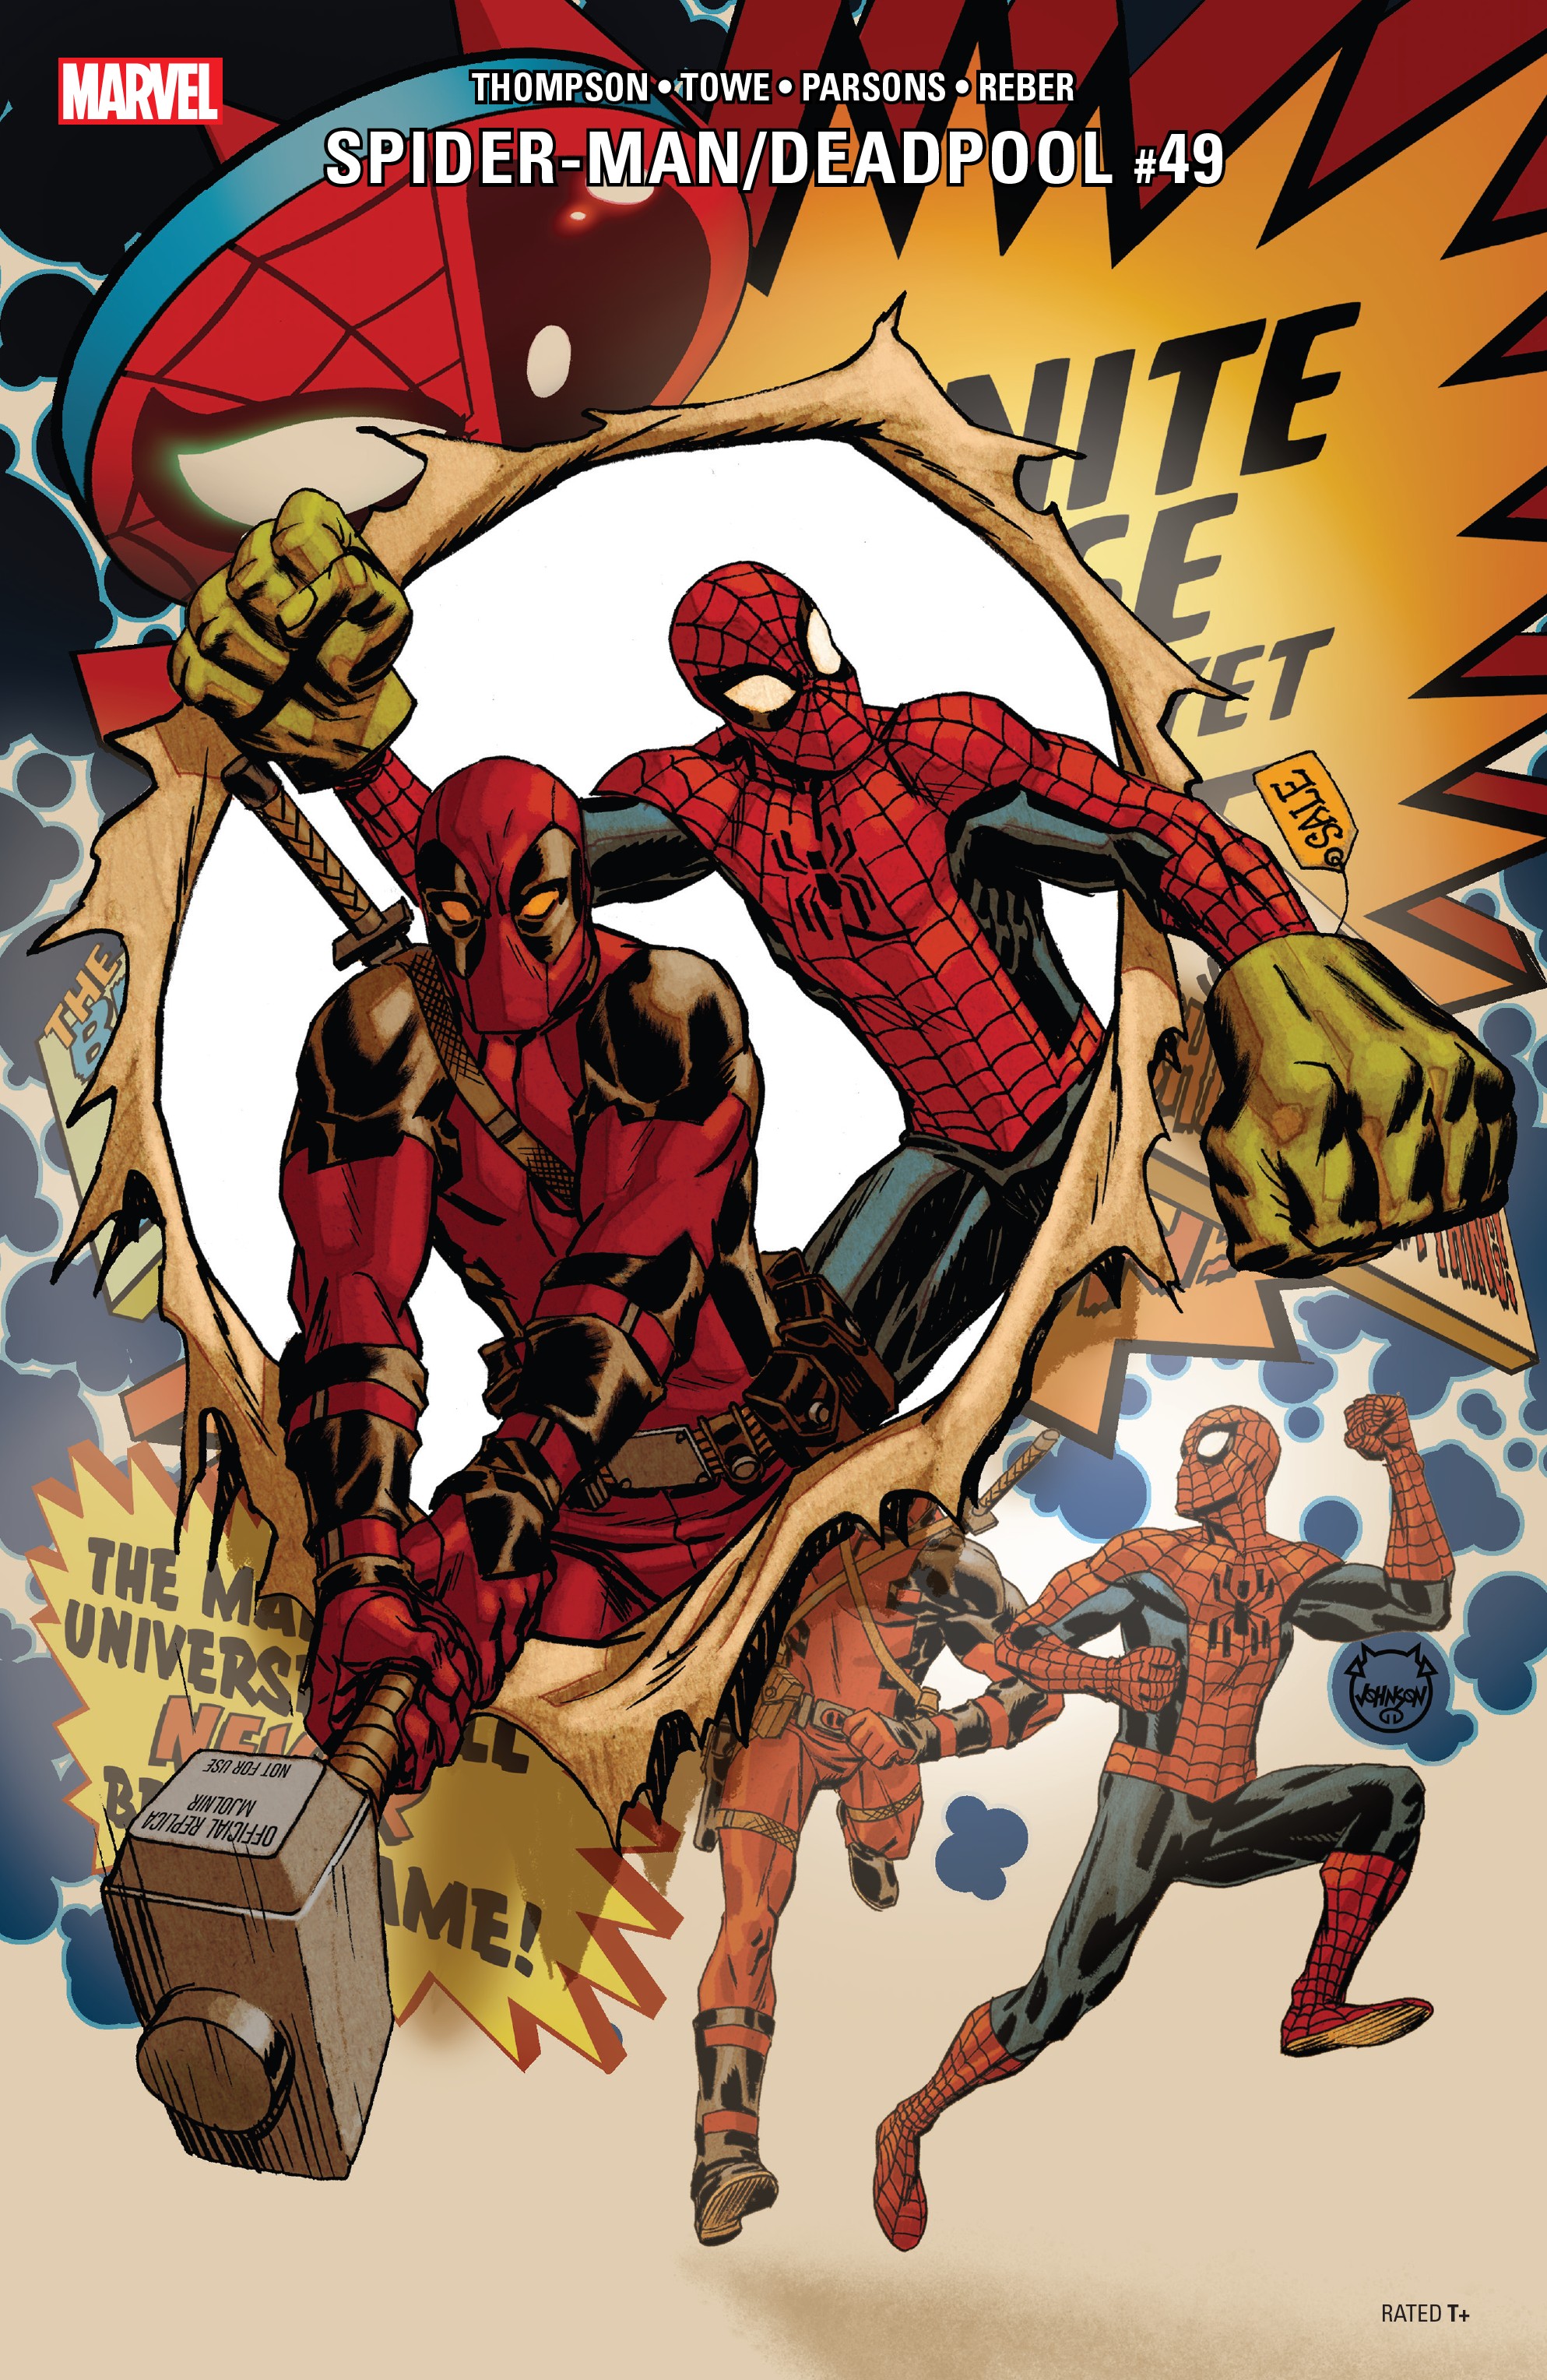 Spider Man Deadpool Issue 49 | Read Spider Man Deadpool Issue 49 comic  online in high quality. Read Full Comic online for free - Read comics online  in high quality .| READ COMIC ONLINE